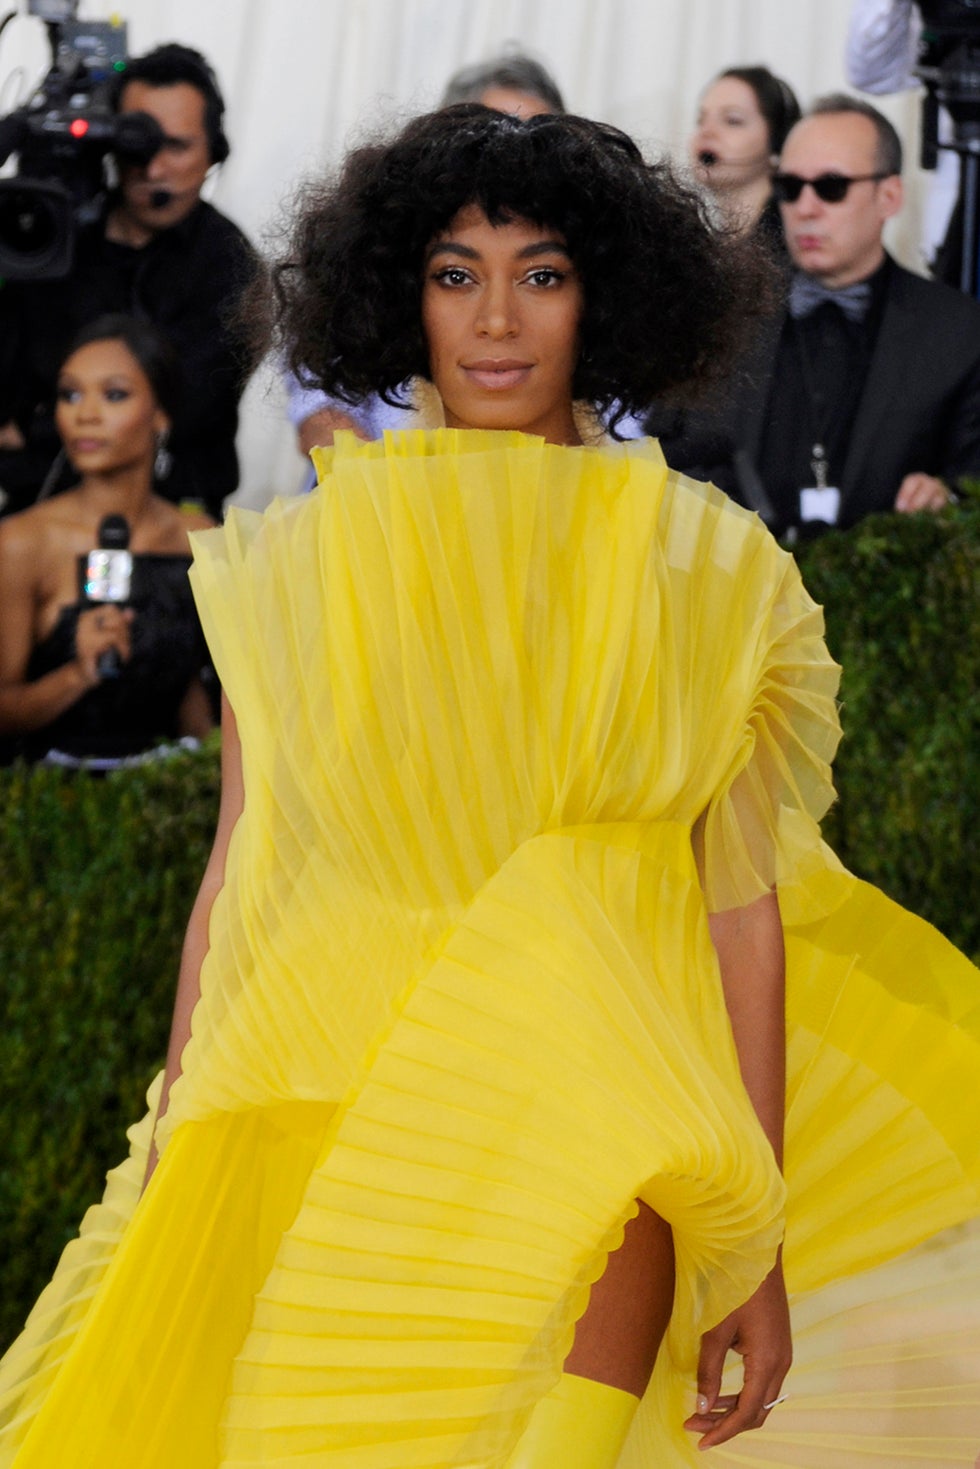 Stop Everything! Solange Just Dropped Two Videos From Her New Album, 'A Seat At The Table'
